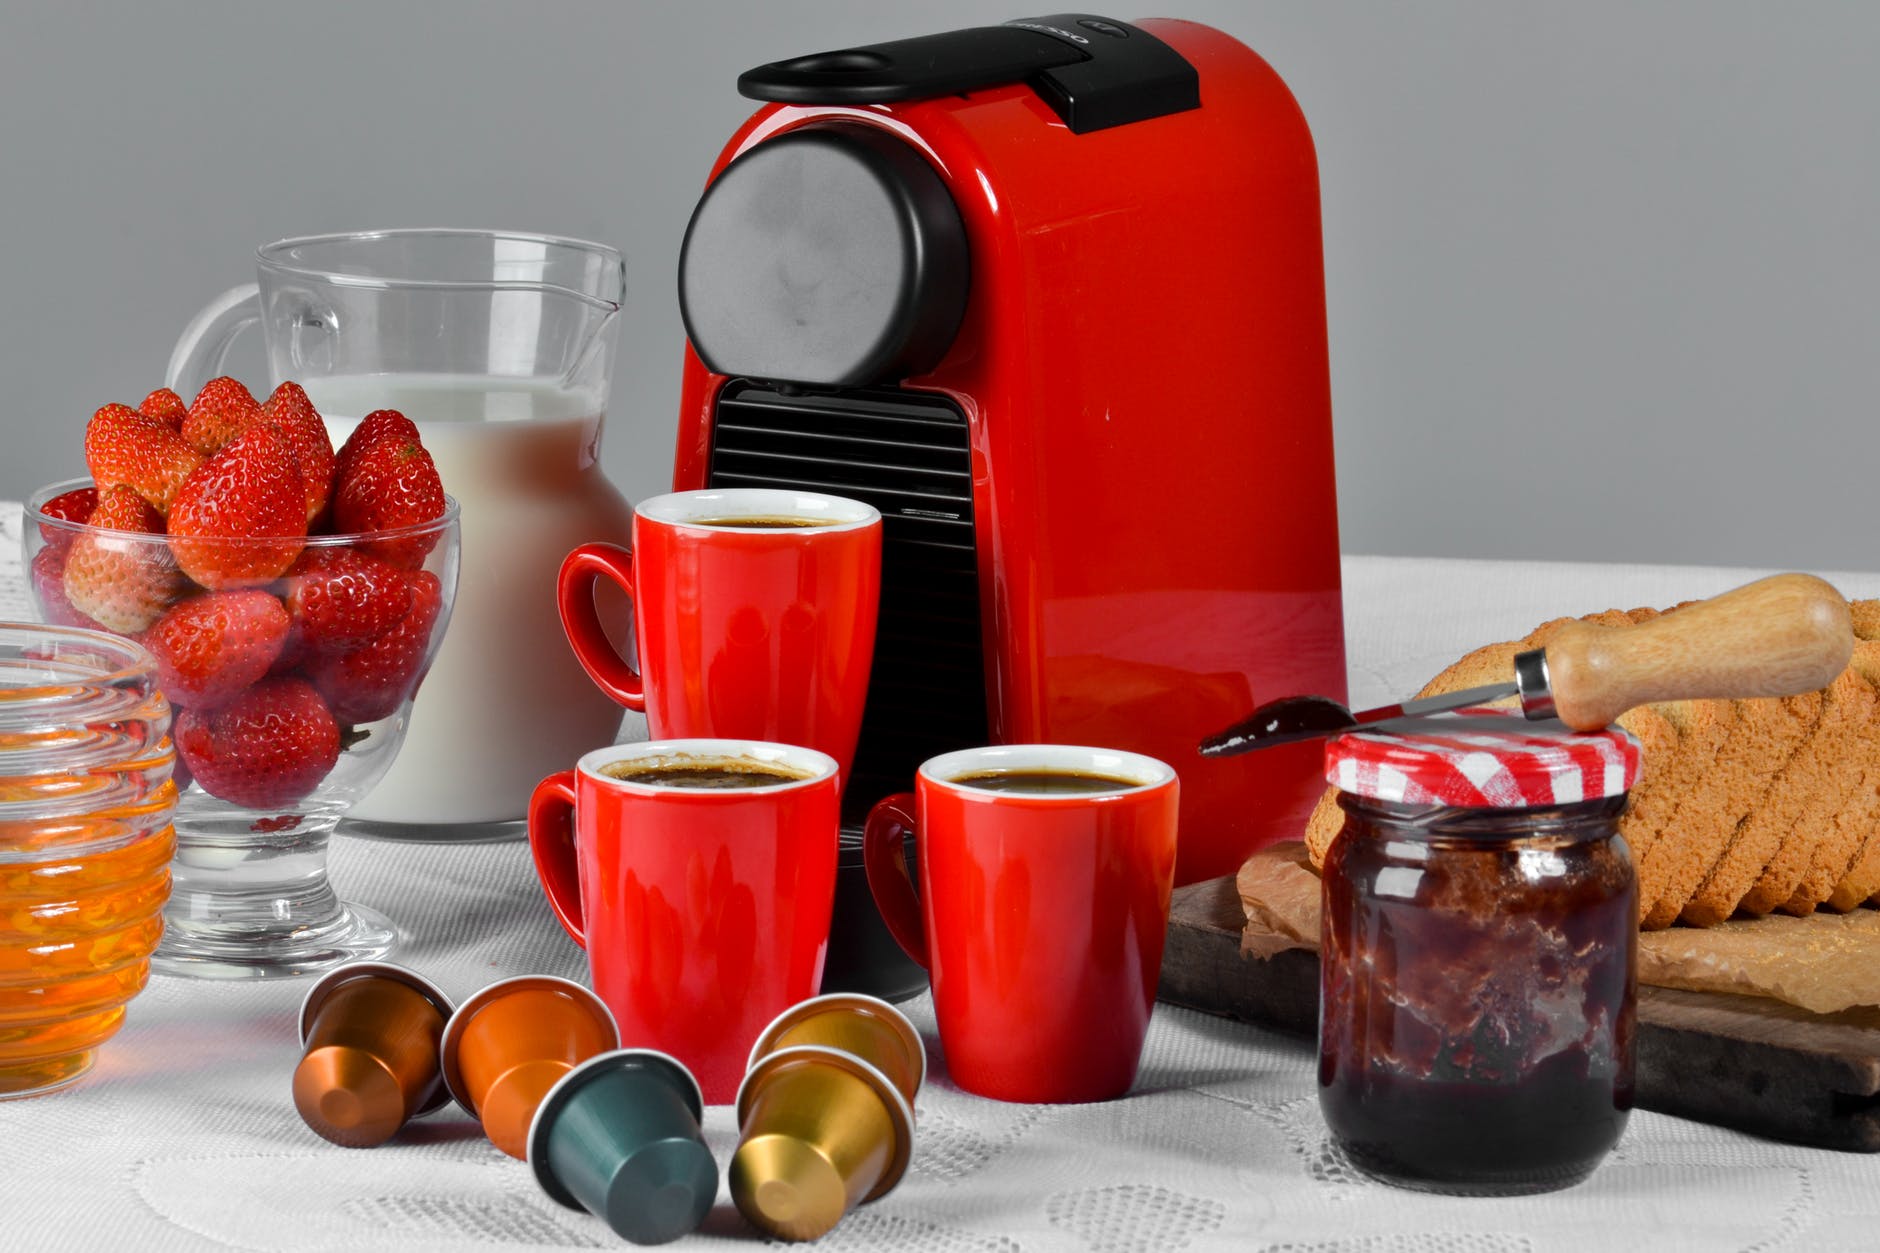 red, small, coffee maker